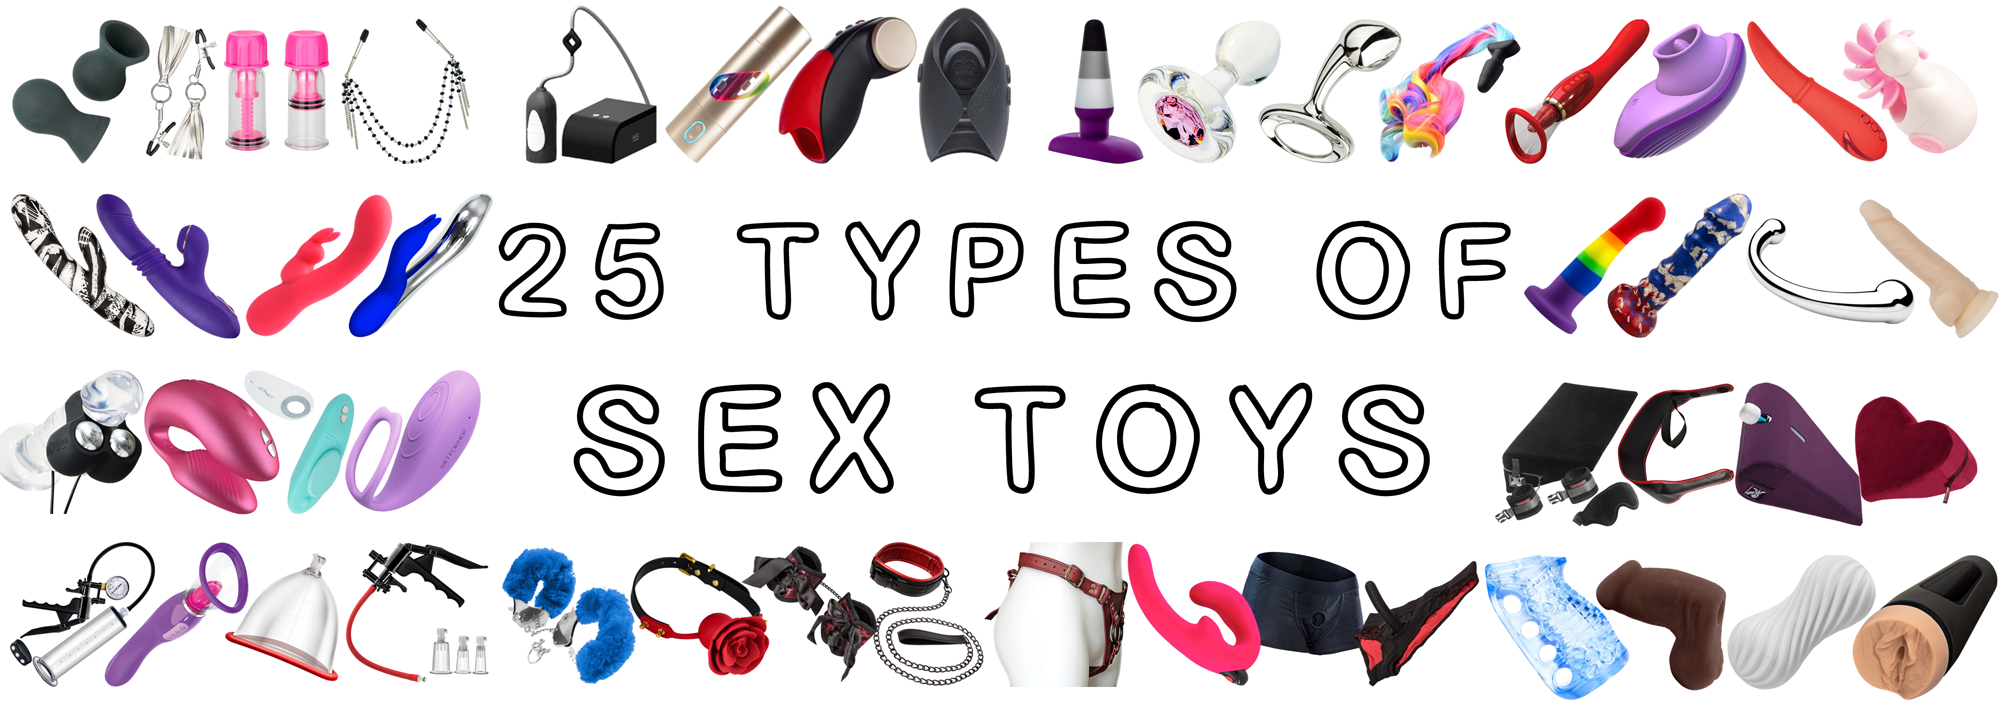 25 Types of Sex Toys A Guide to Help You Know Whats Out There